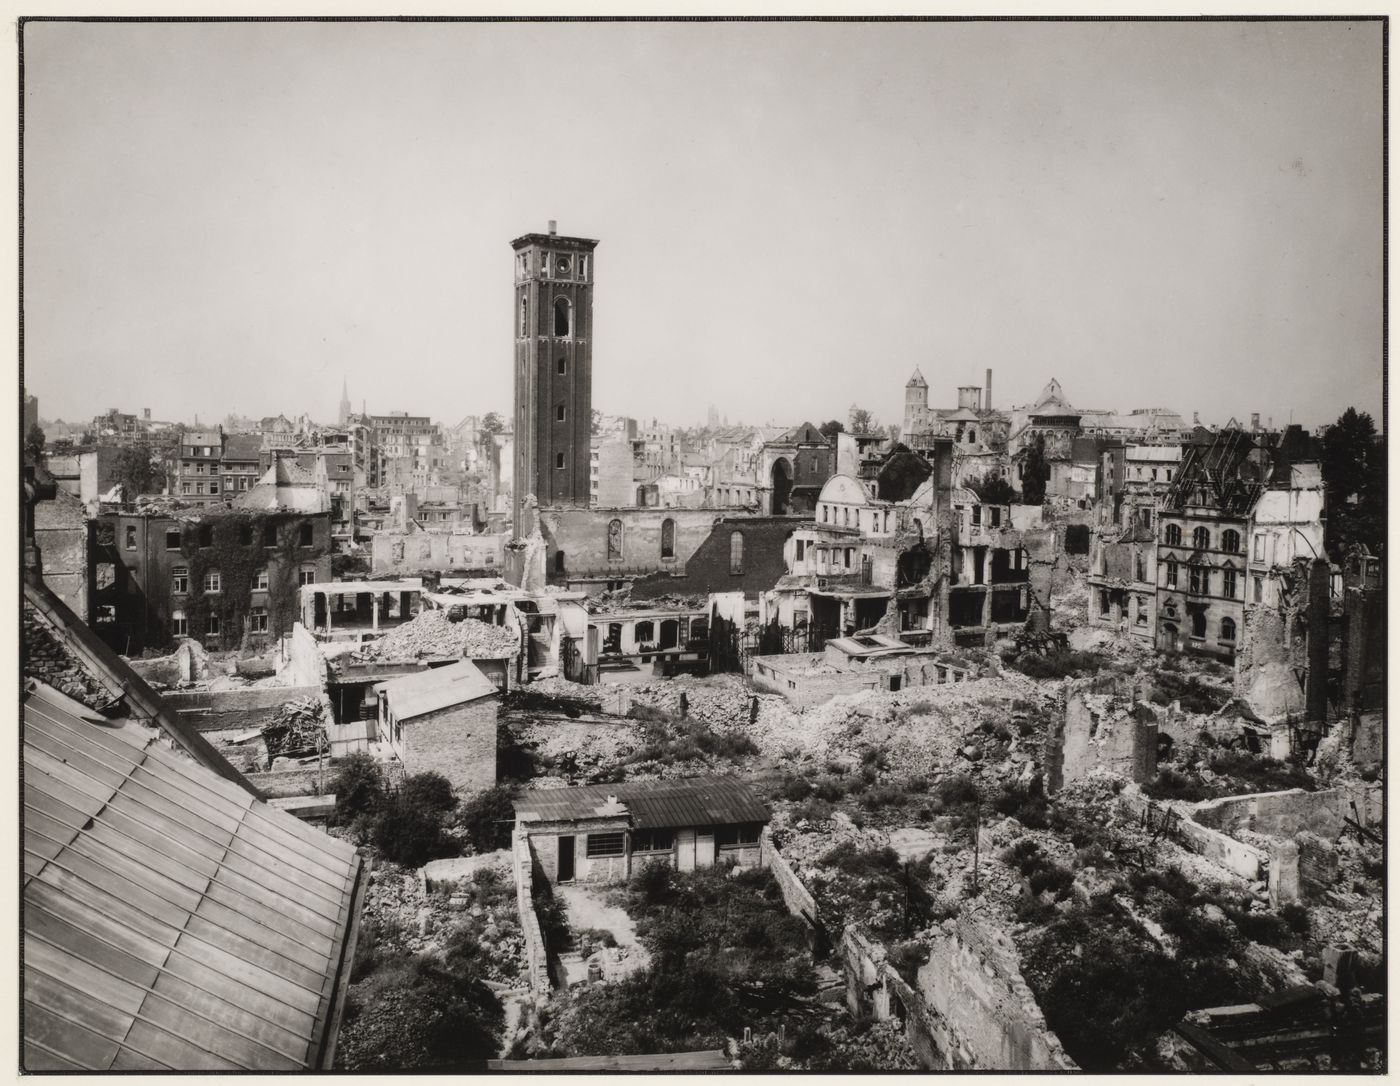 View of destroyed buildings around the Elendskirche, Cologne, Germany